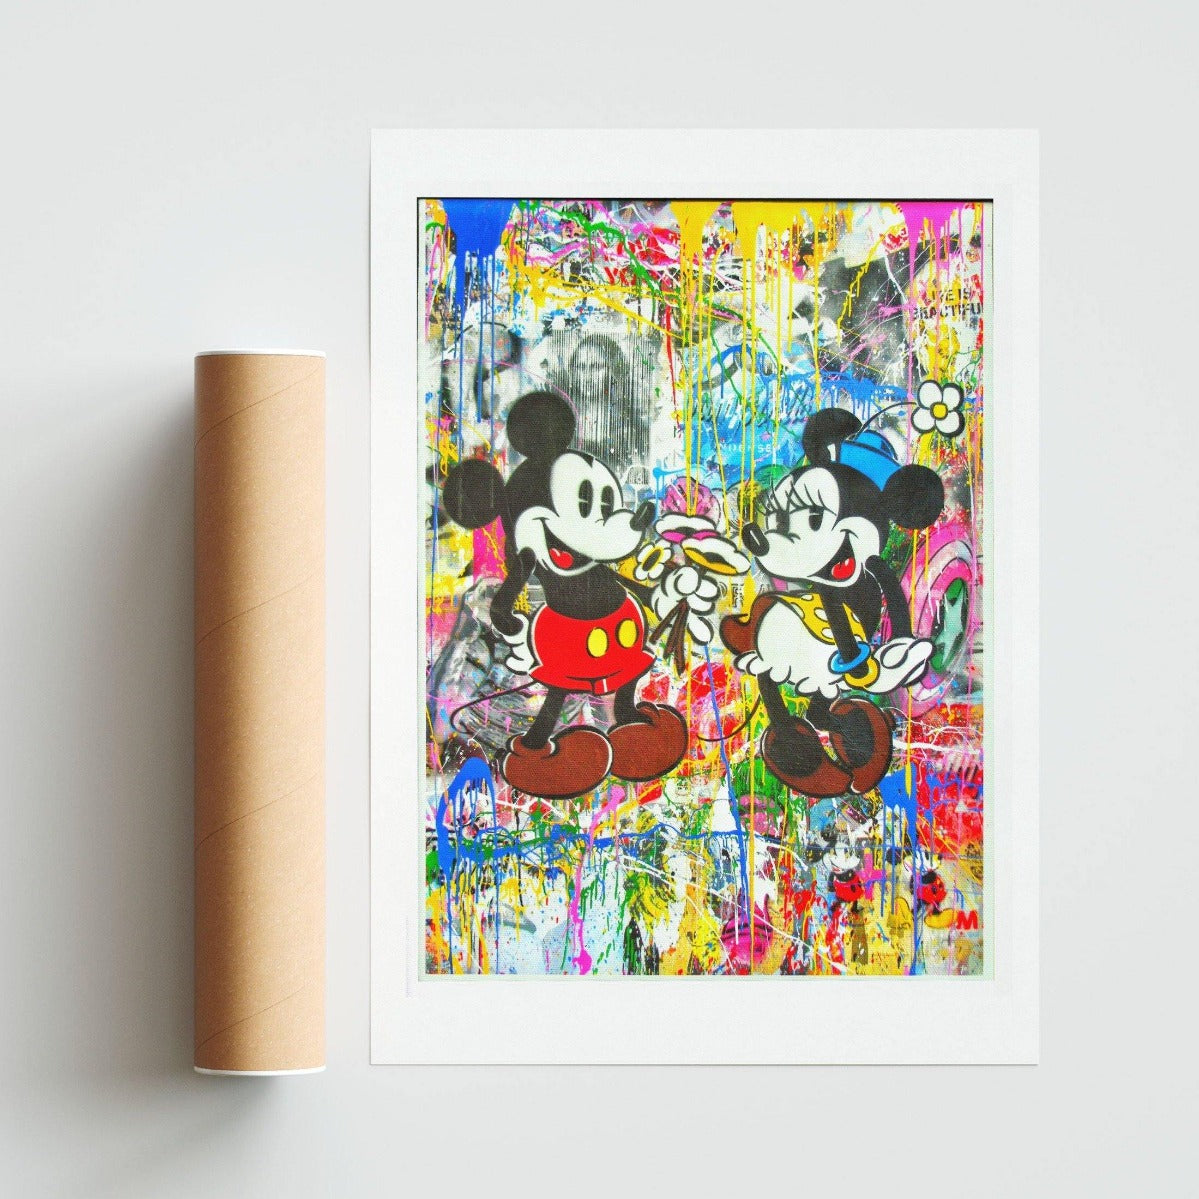 This isn't your average Mickey Mouse print. Taken from the archives of street artist Mr. Brainwash, this playful piece is perfect for lovers of pop art. With its iconic red and yellow design, it's a true homage to the world's most famous mouse. At 98Types, we love unique and statement-making art. So if you're looking for a piece that will turn heads, this is the print for you. - 98types